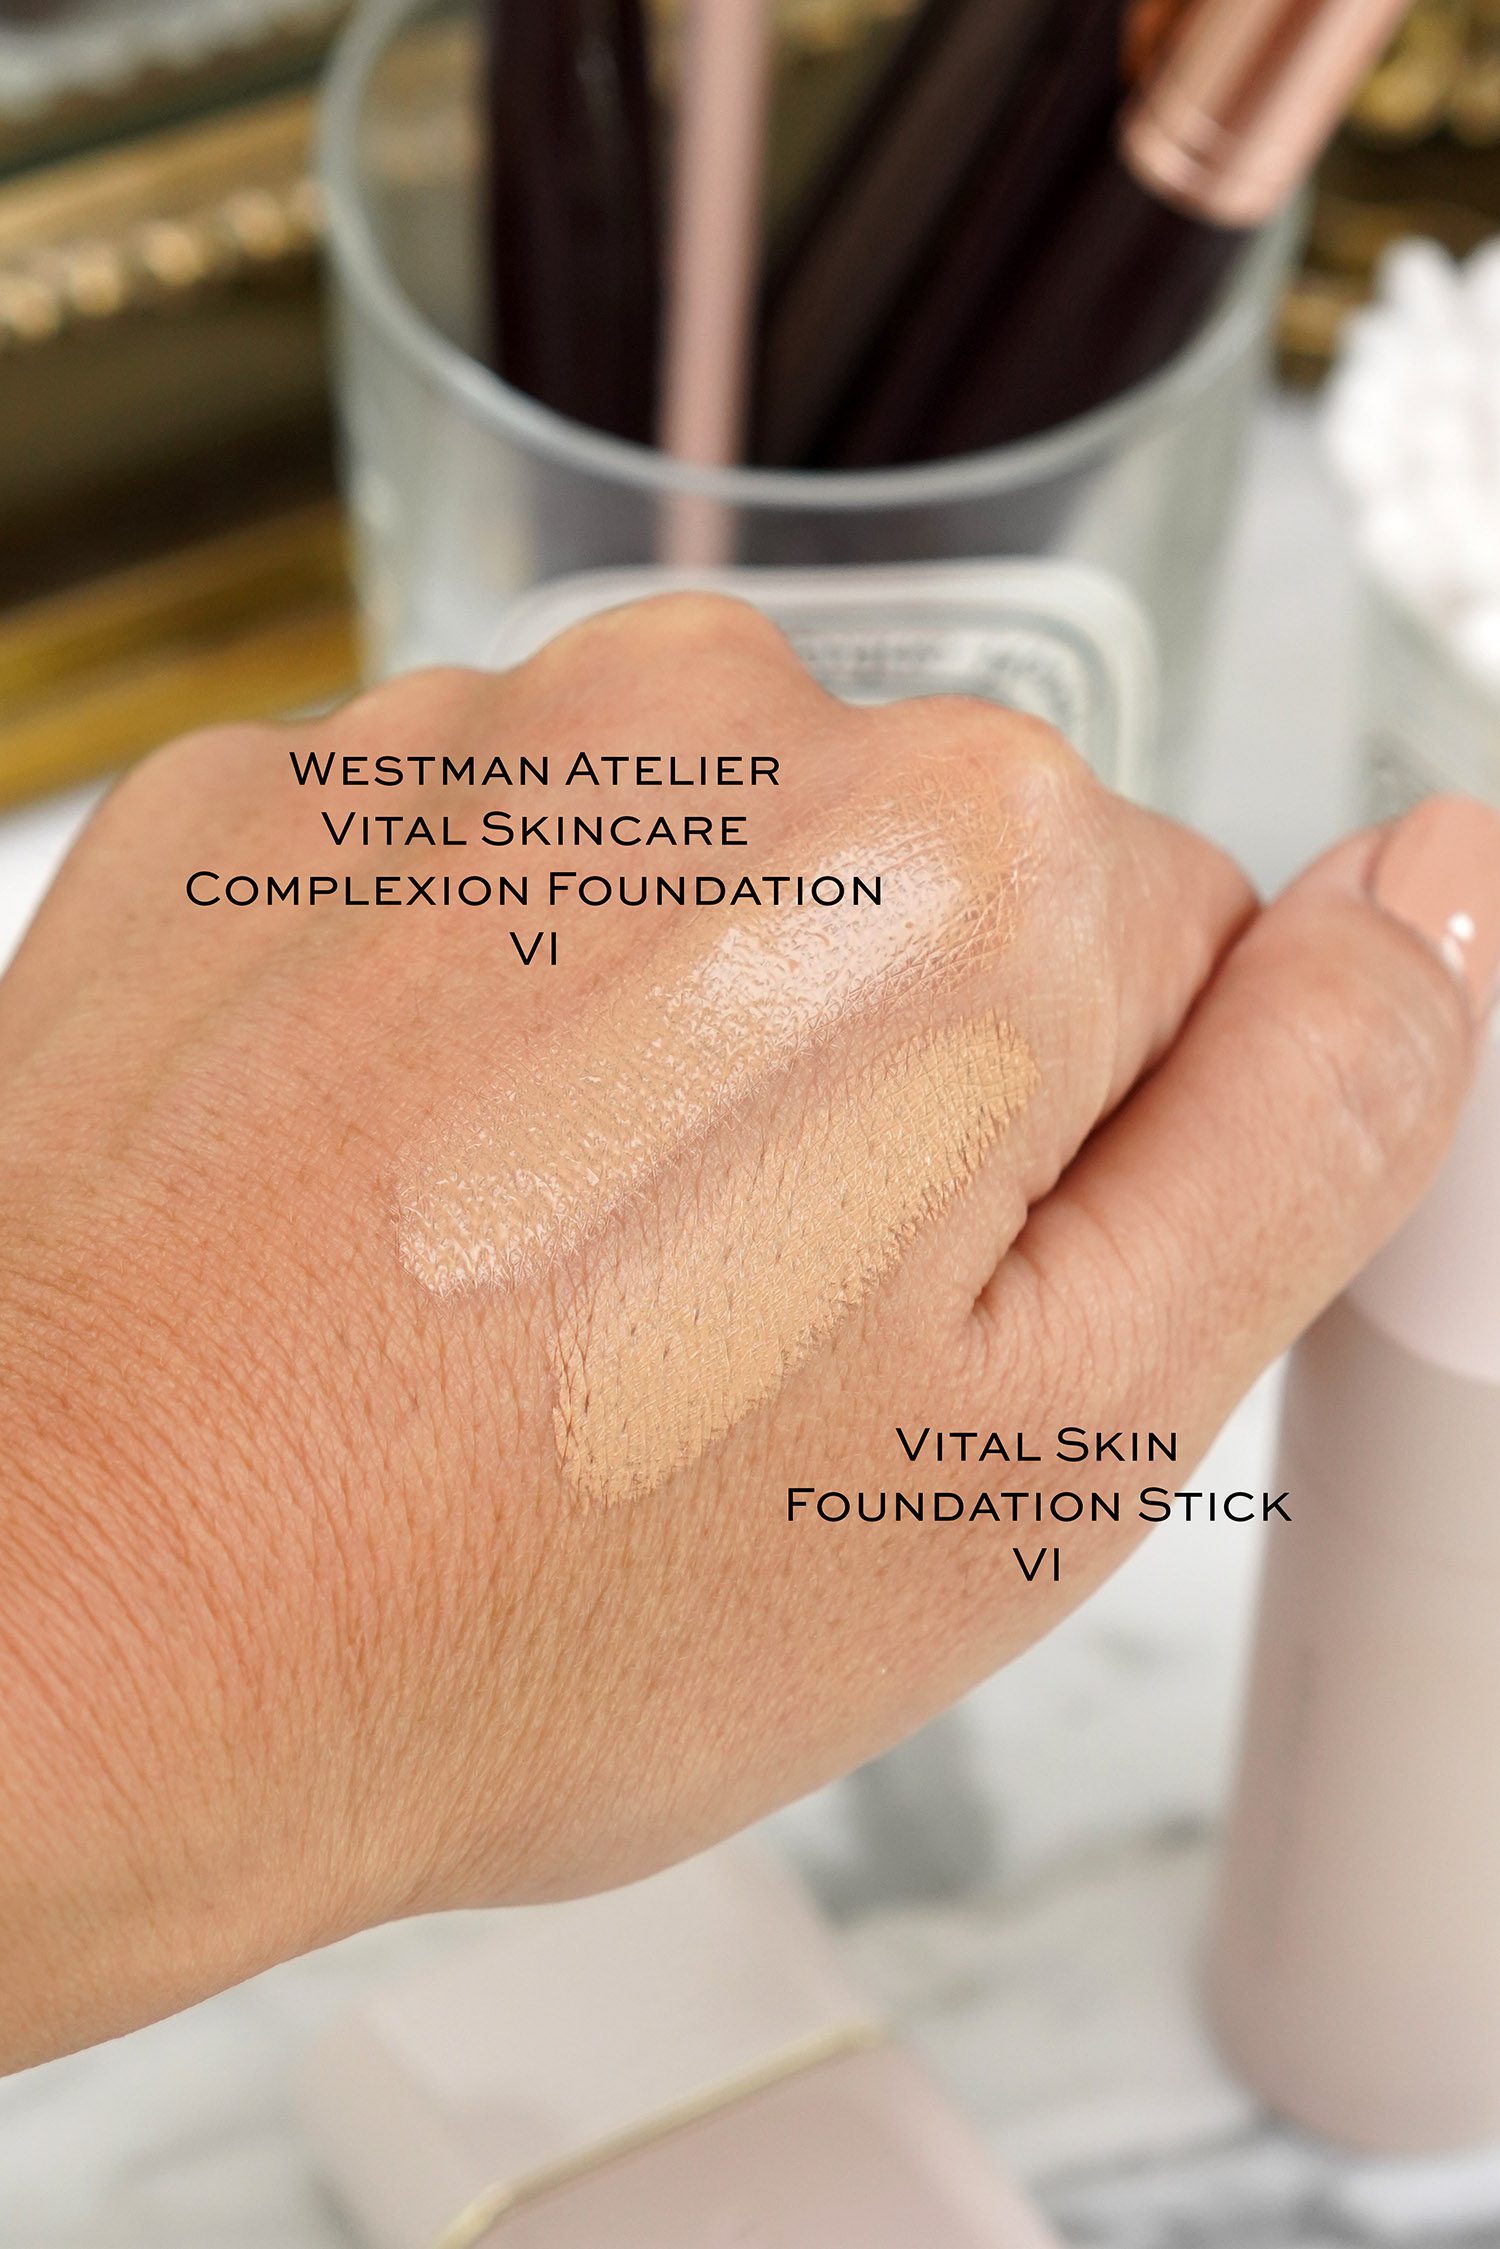 Westman Atelier Vital Skincare Complexion Drop first impression